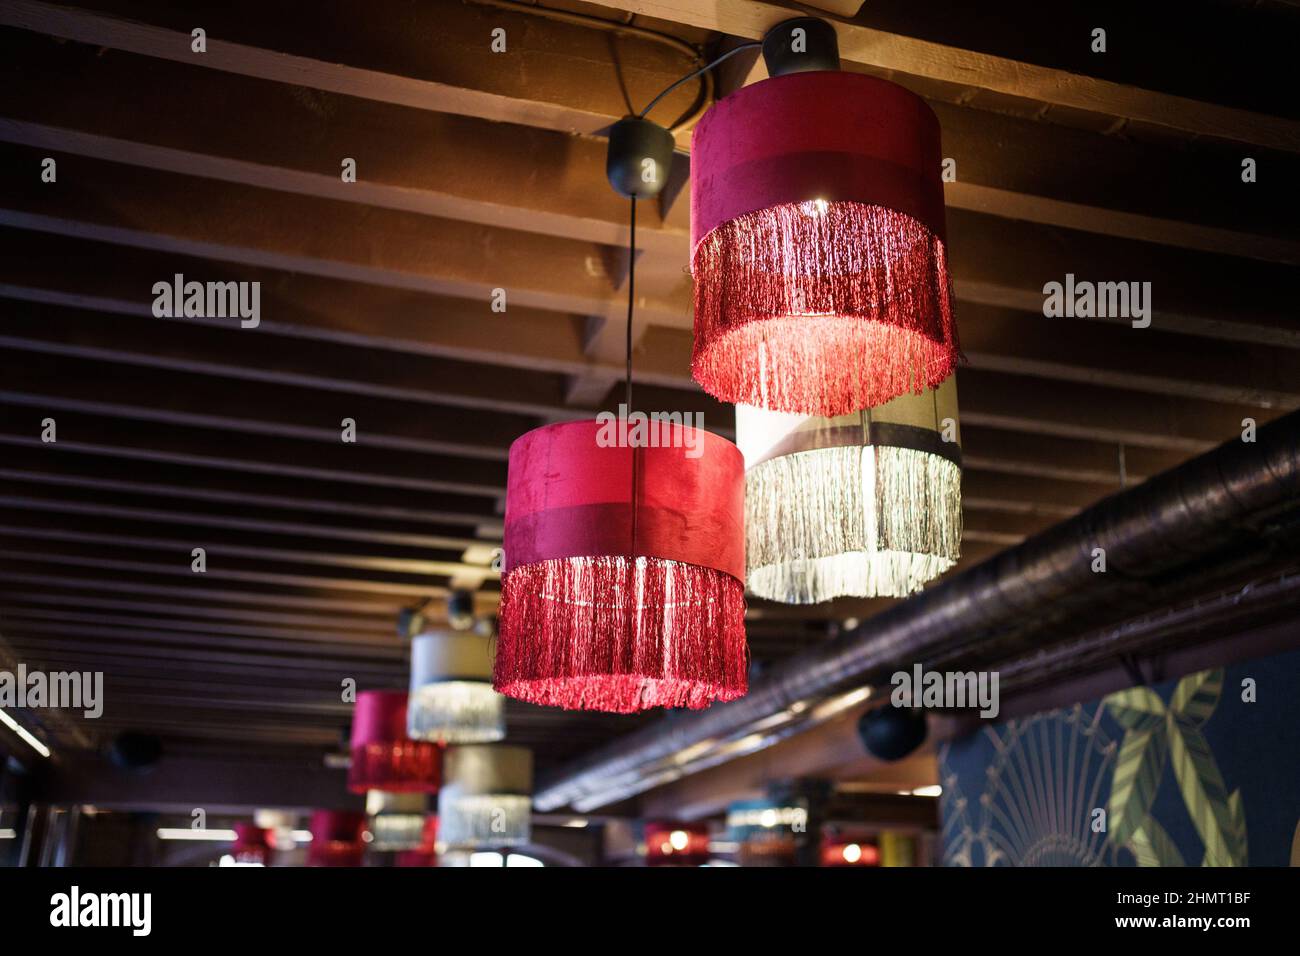 Interior of modern restaurant with chandeliers hanging from a wooden beam ceiling. Stock Photo